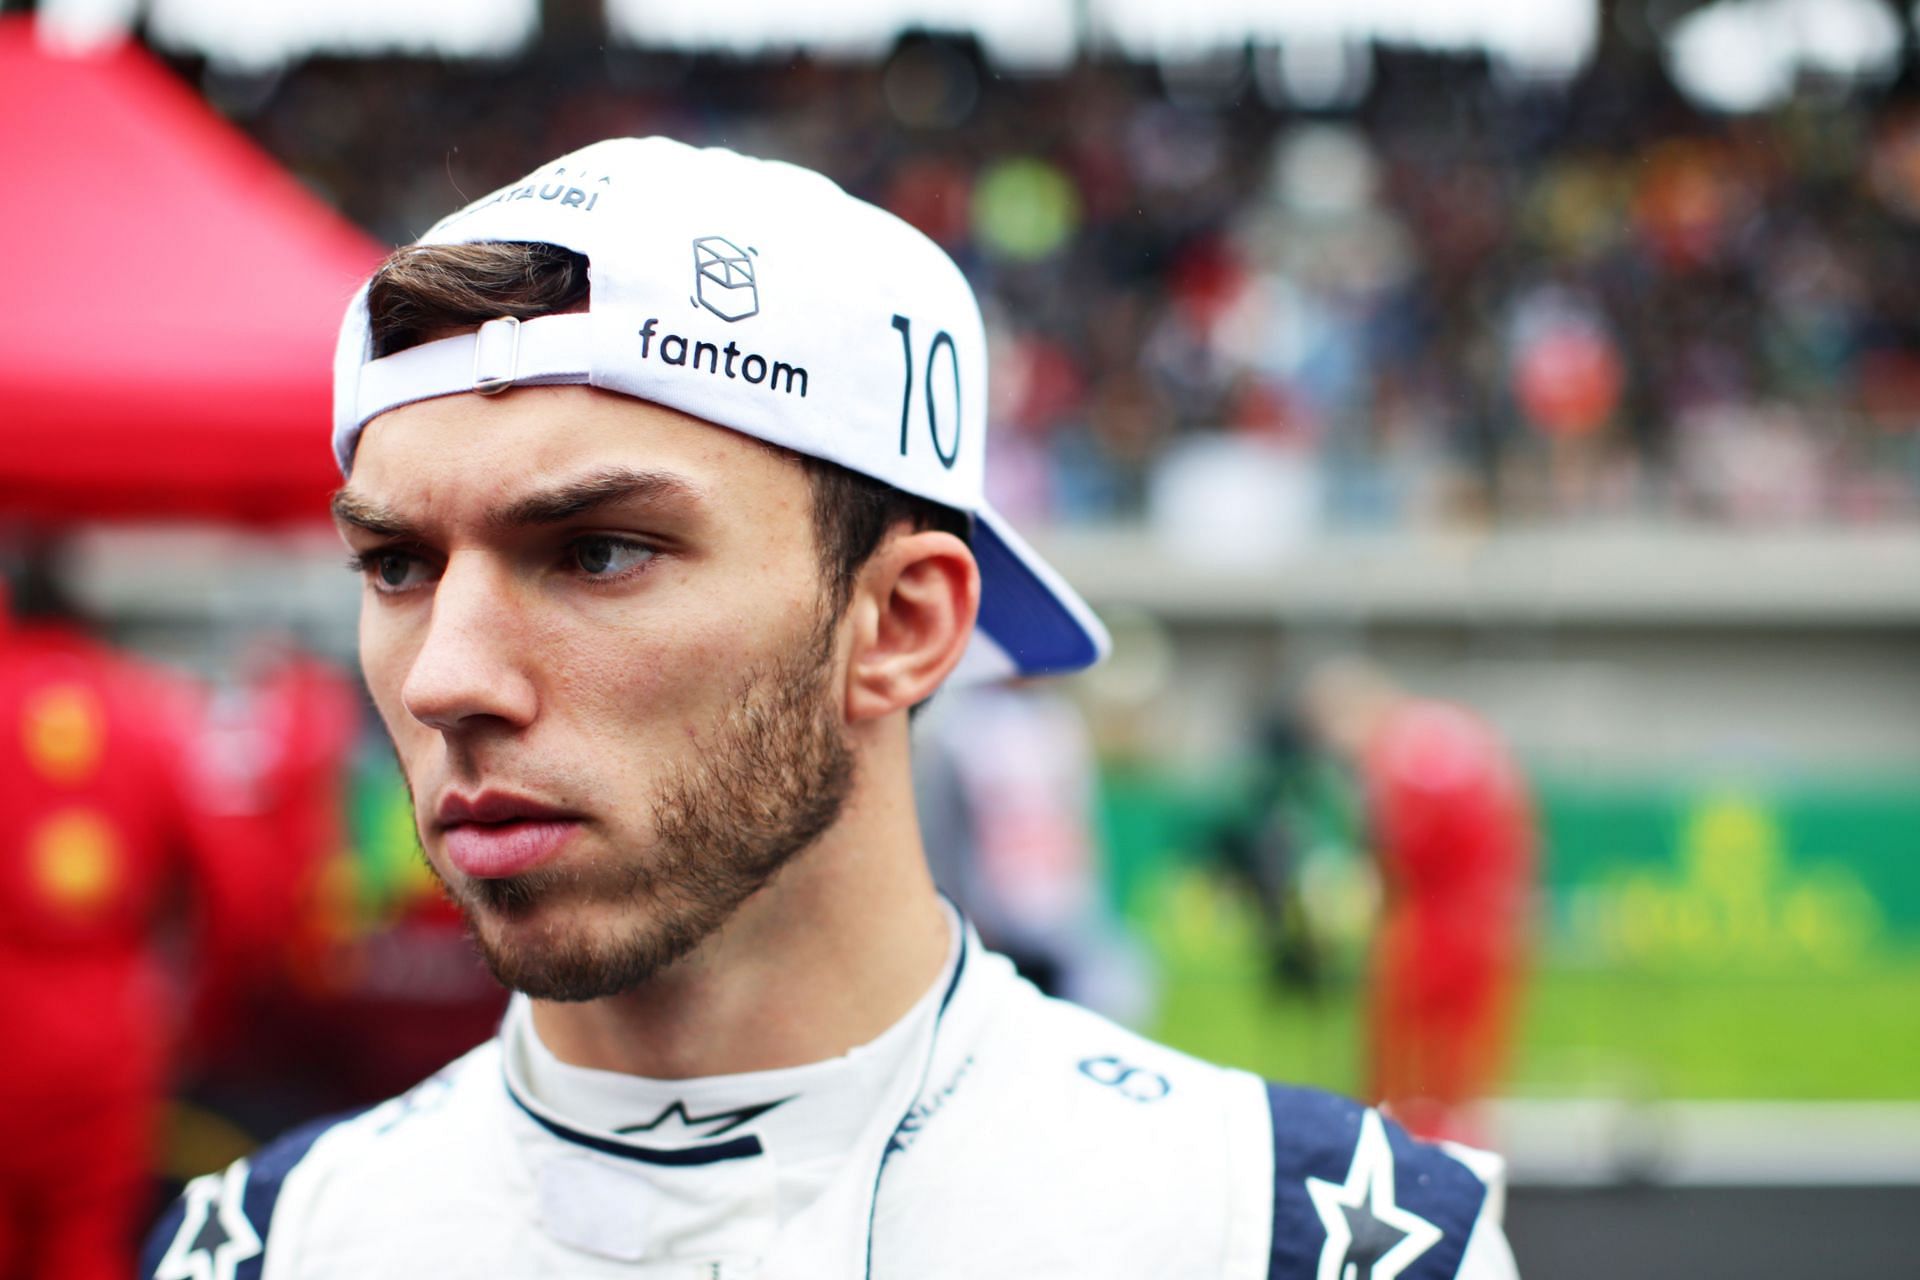 Pierre Gasly of Scuderia AlphaTauri prepares to drive on the grid during the 2021 Turkish GP. (Photo by Peter Fox/Getty Images)